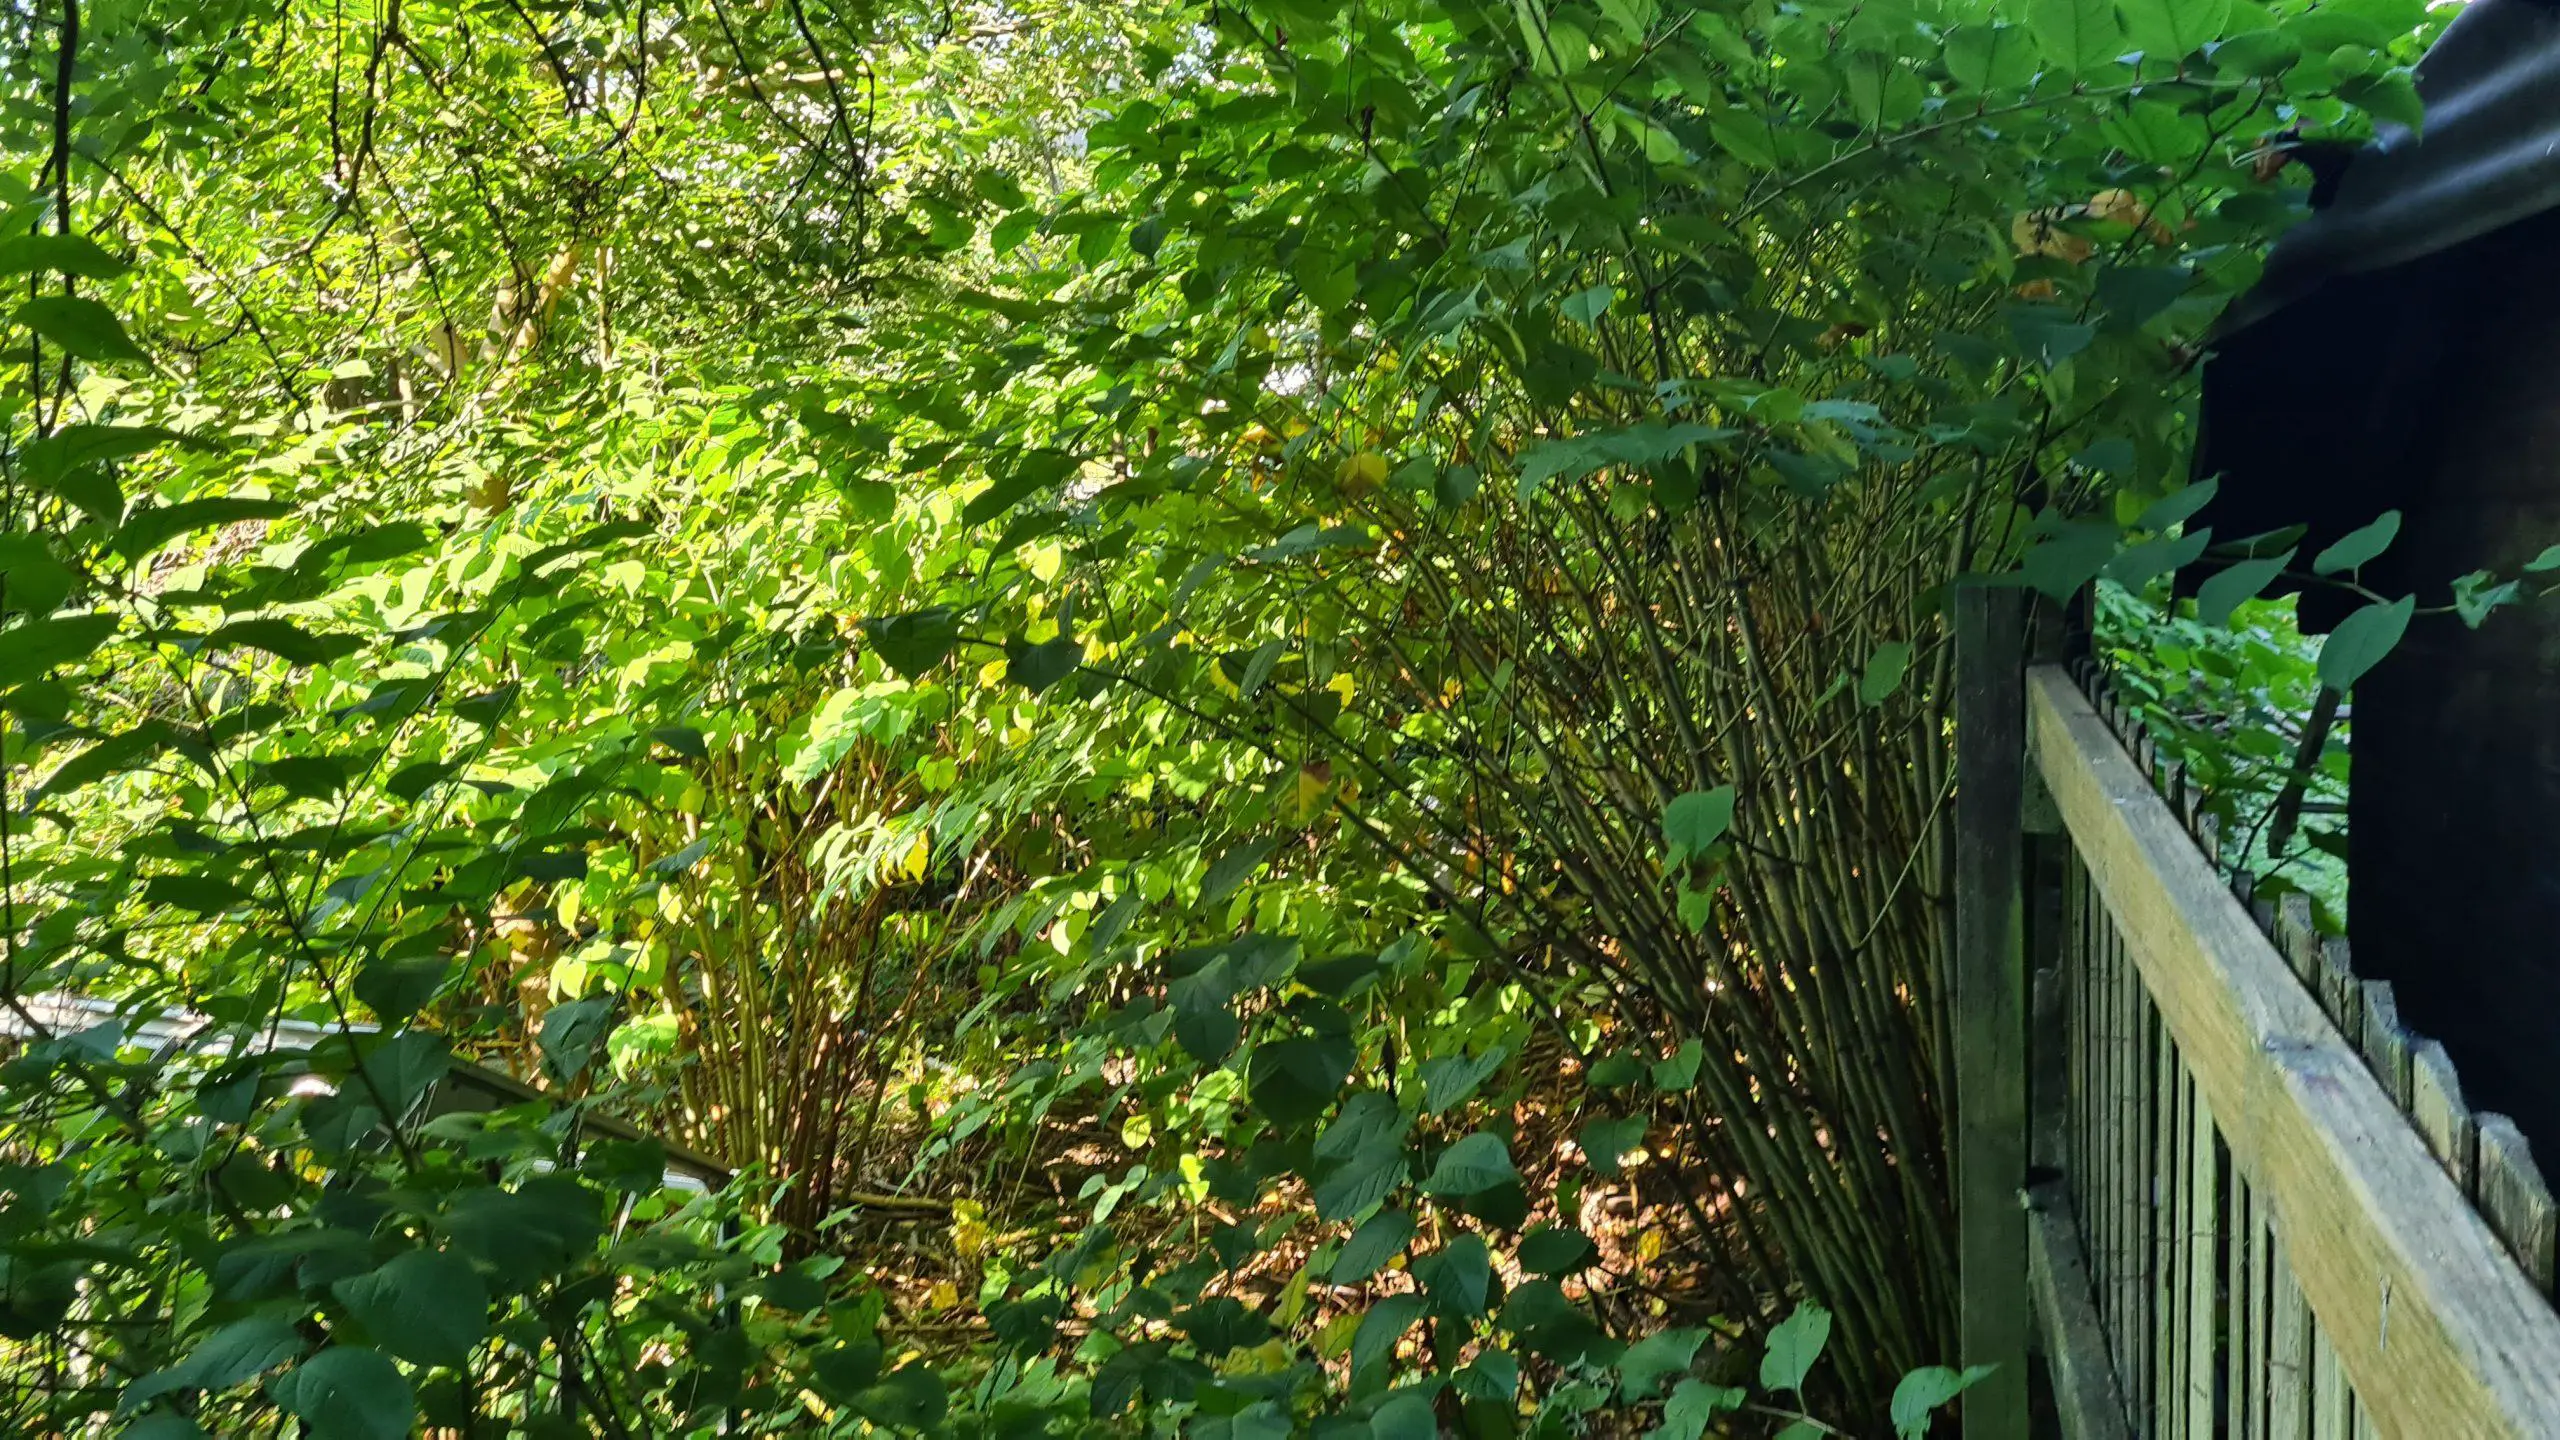 Japanese knotweed grows in both the sun and the shade and is extremely versatile in its survival